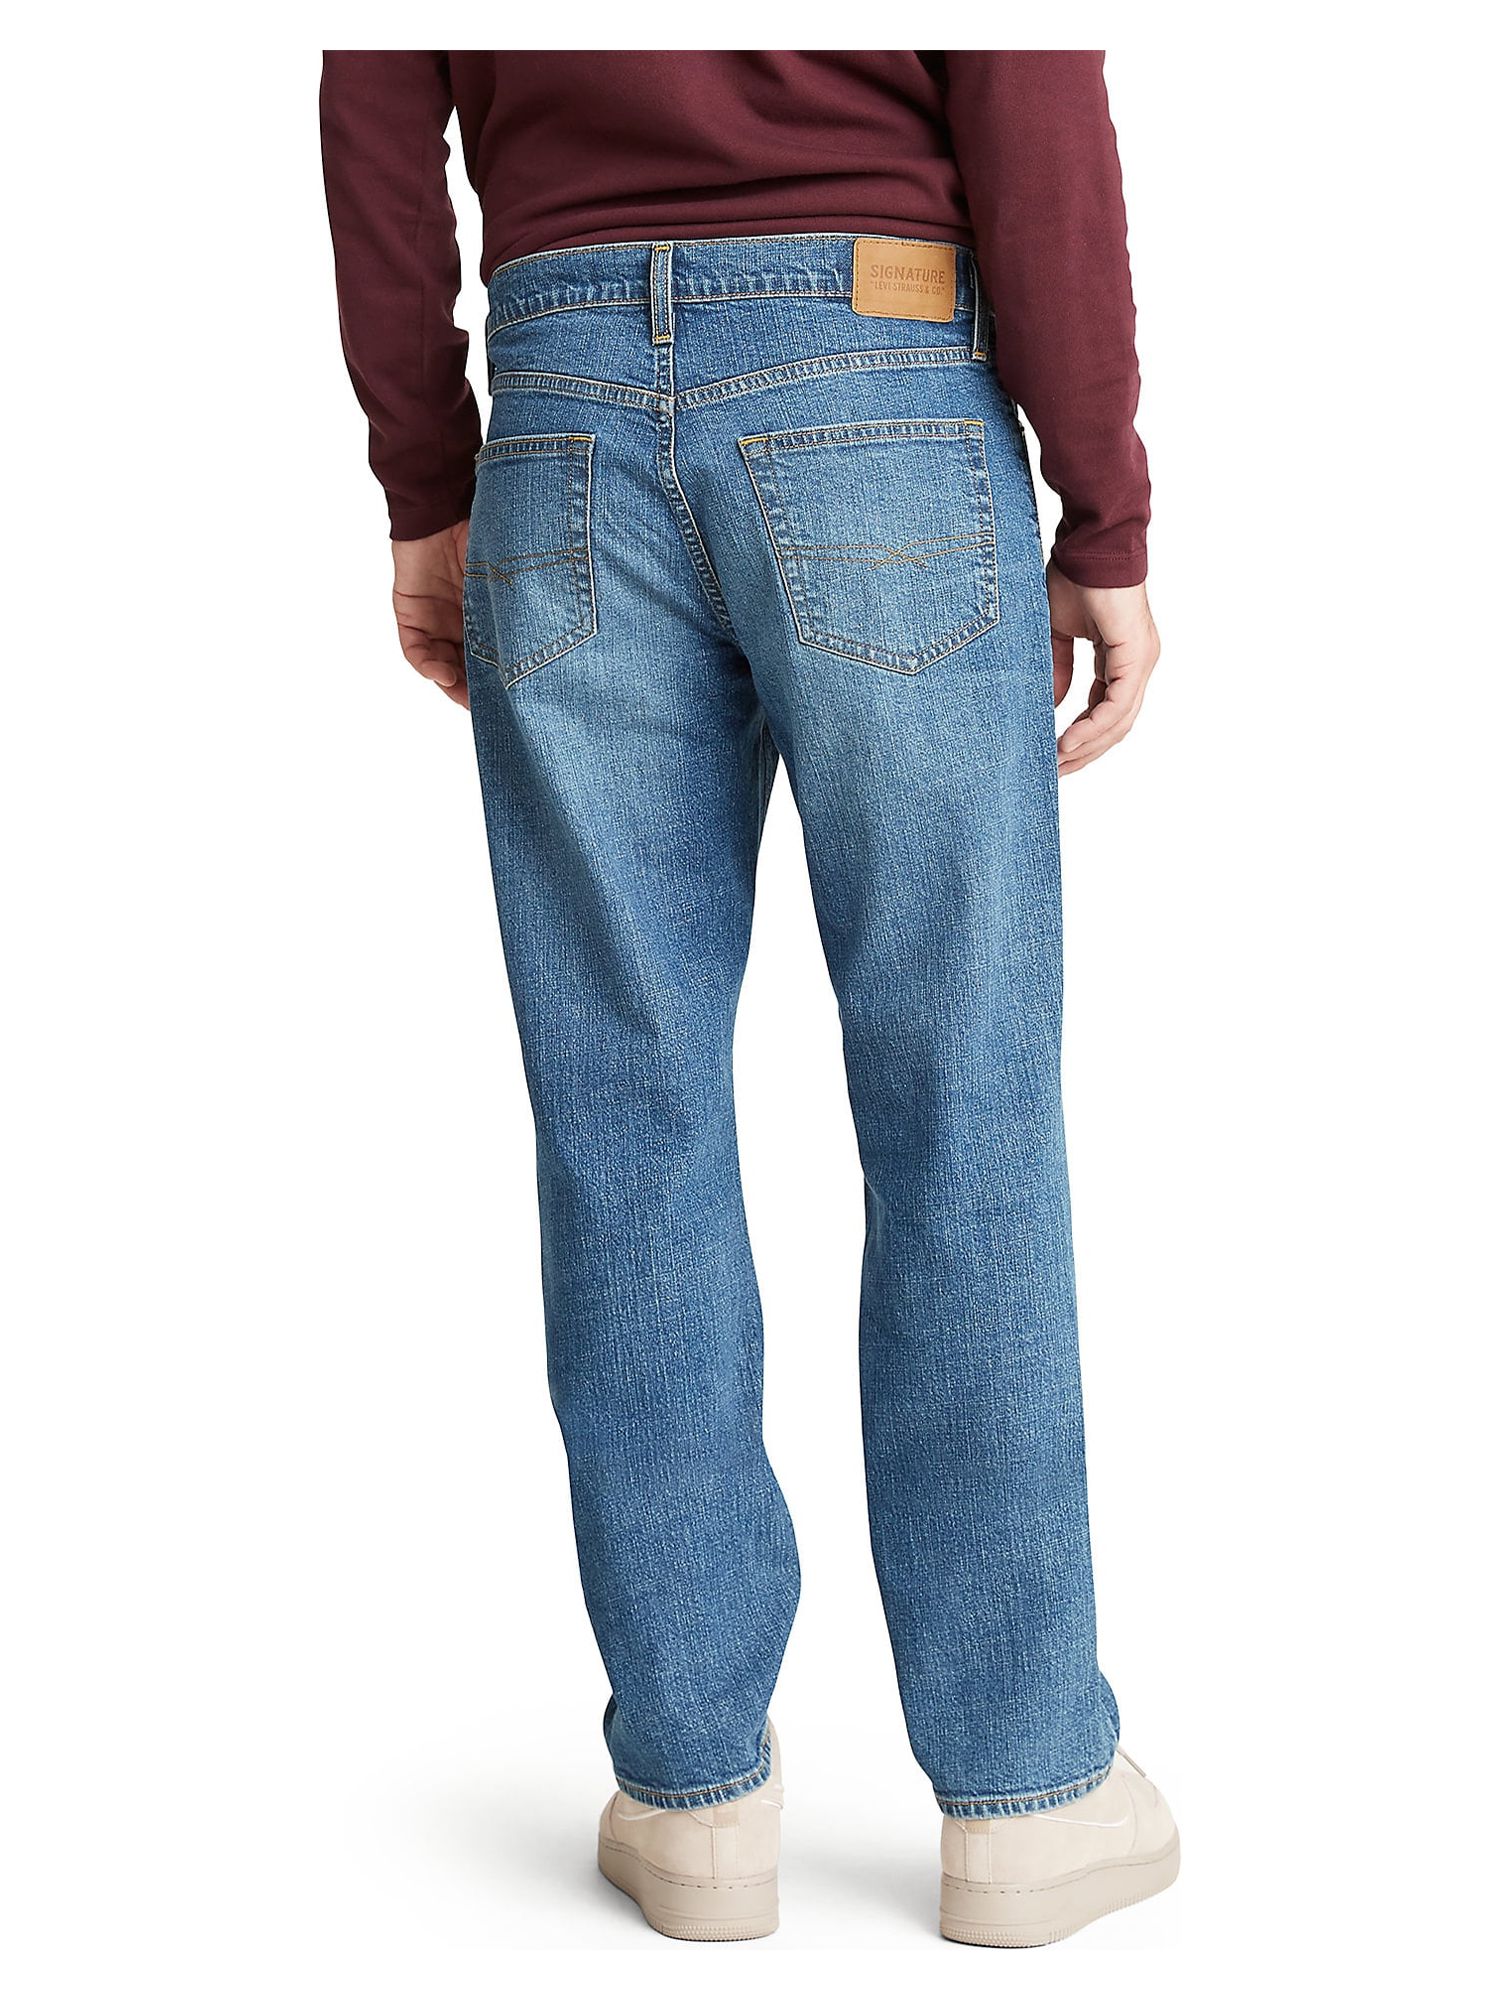 Signature by Levi Strauss & Co. Men's Athletic Fit Jeans - image 3 of 4